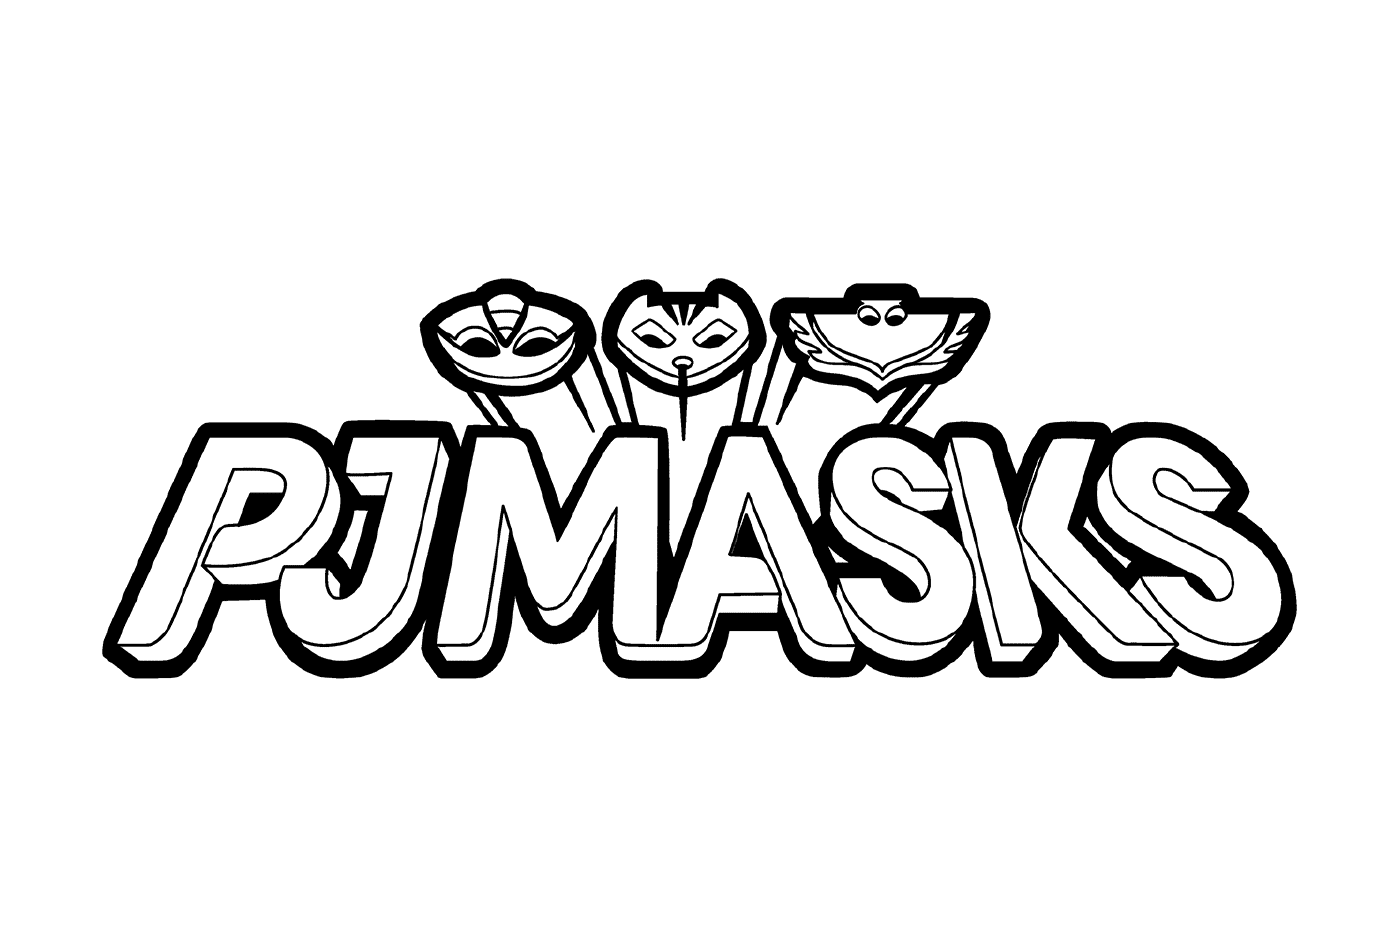  Pyjamasques logo in black and white 